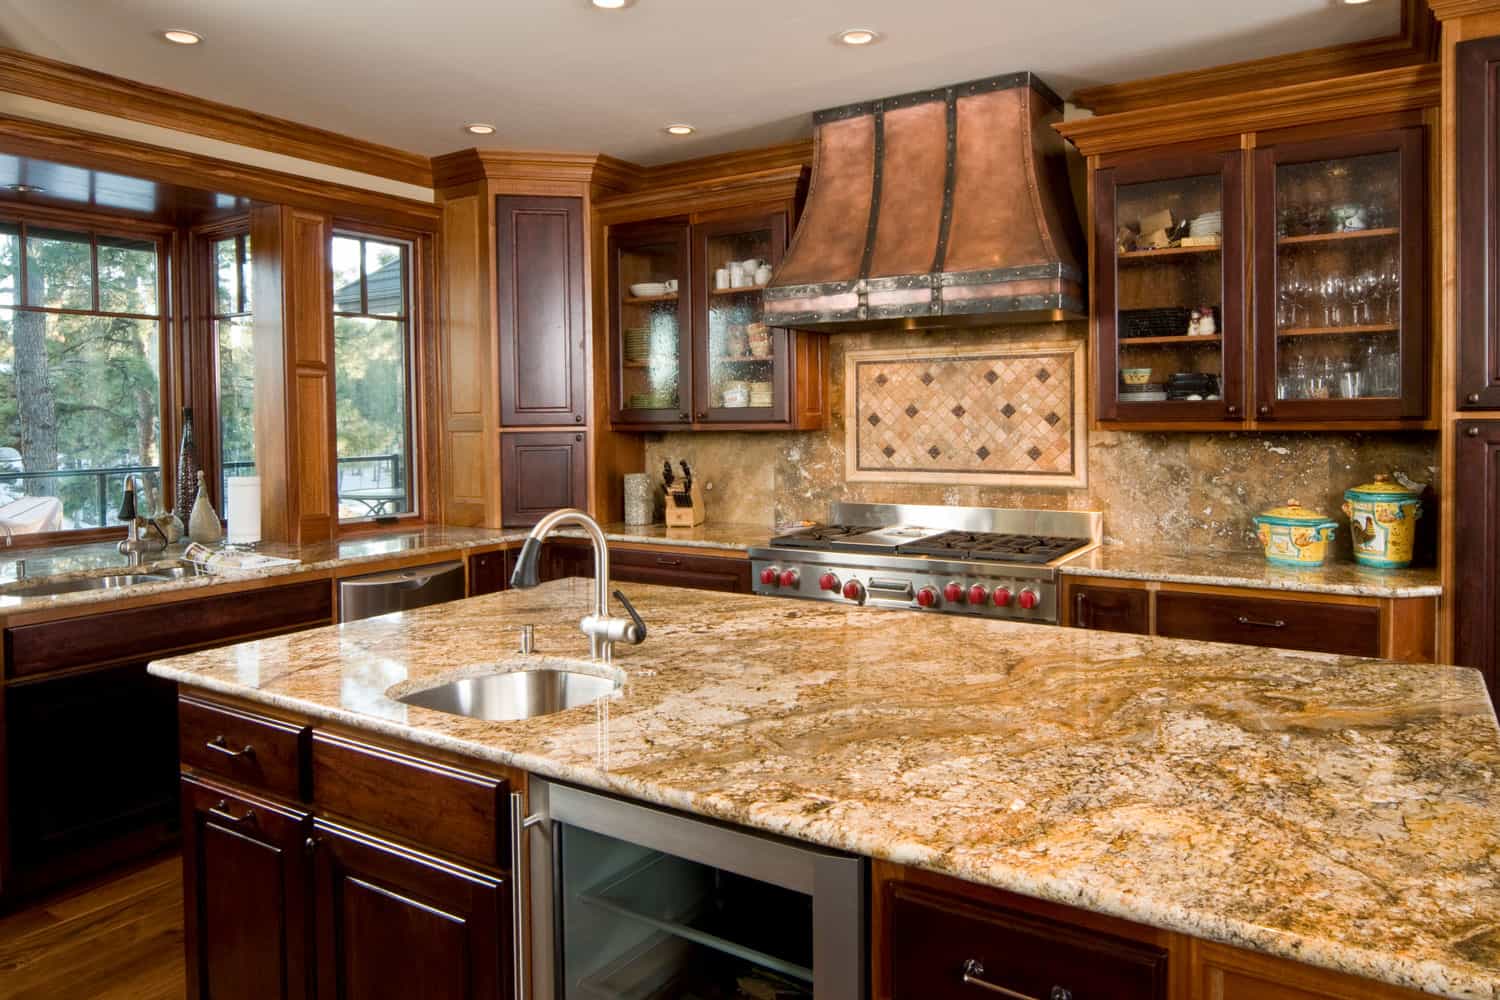 This modern kitchen has a granite counter island